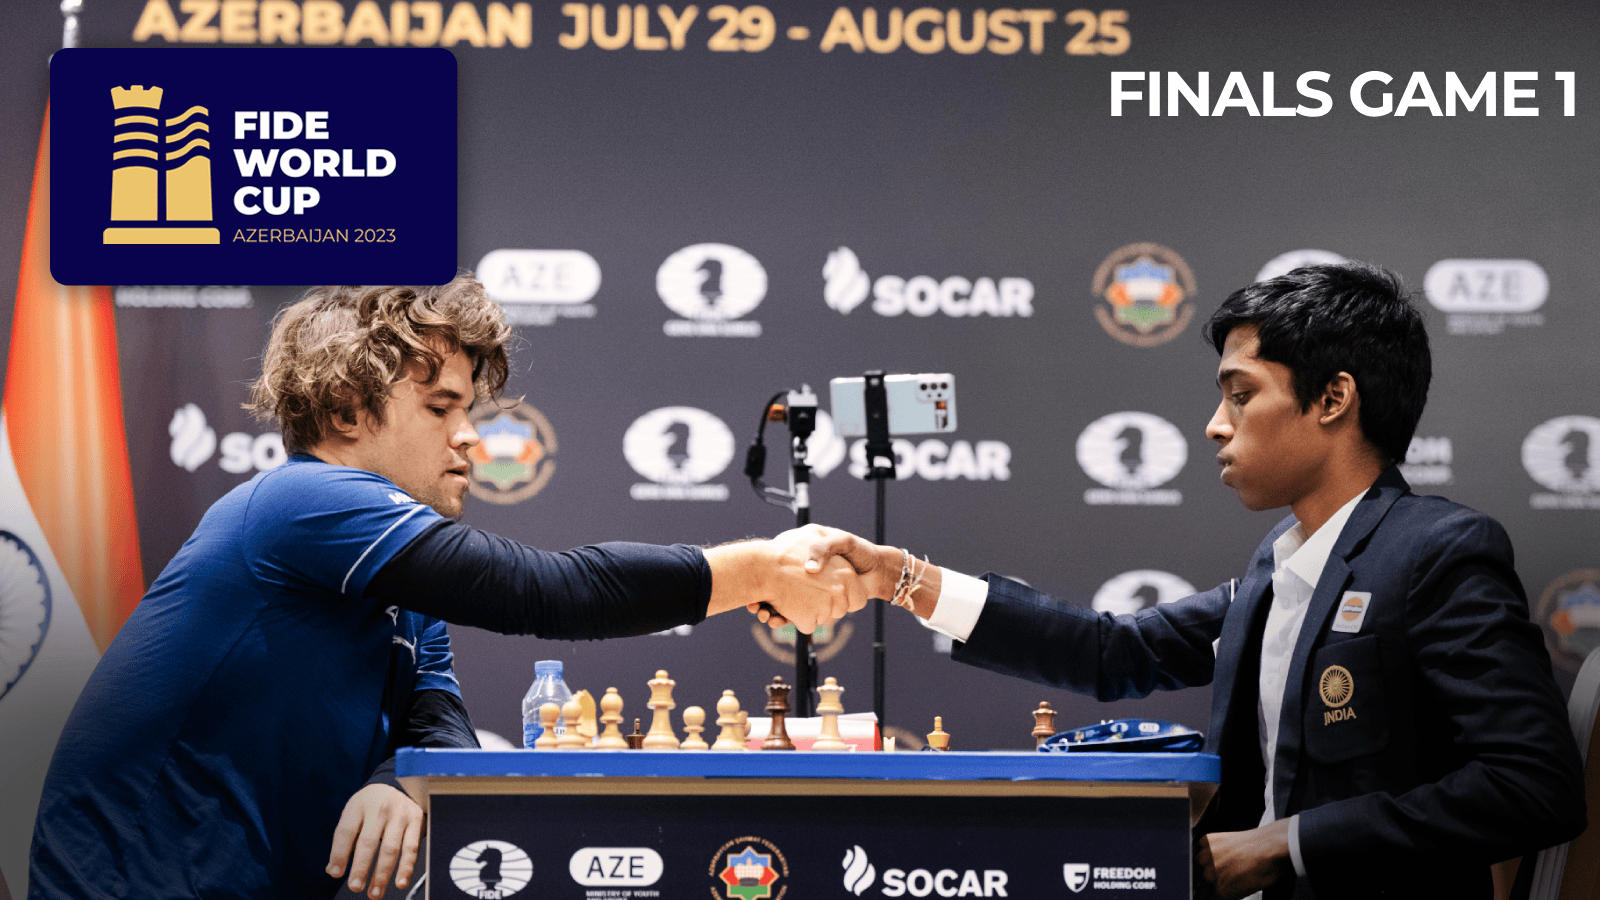 Fide World Cup Winners List of All Time